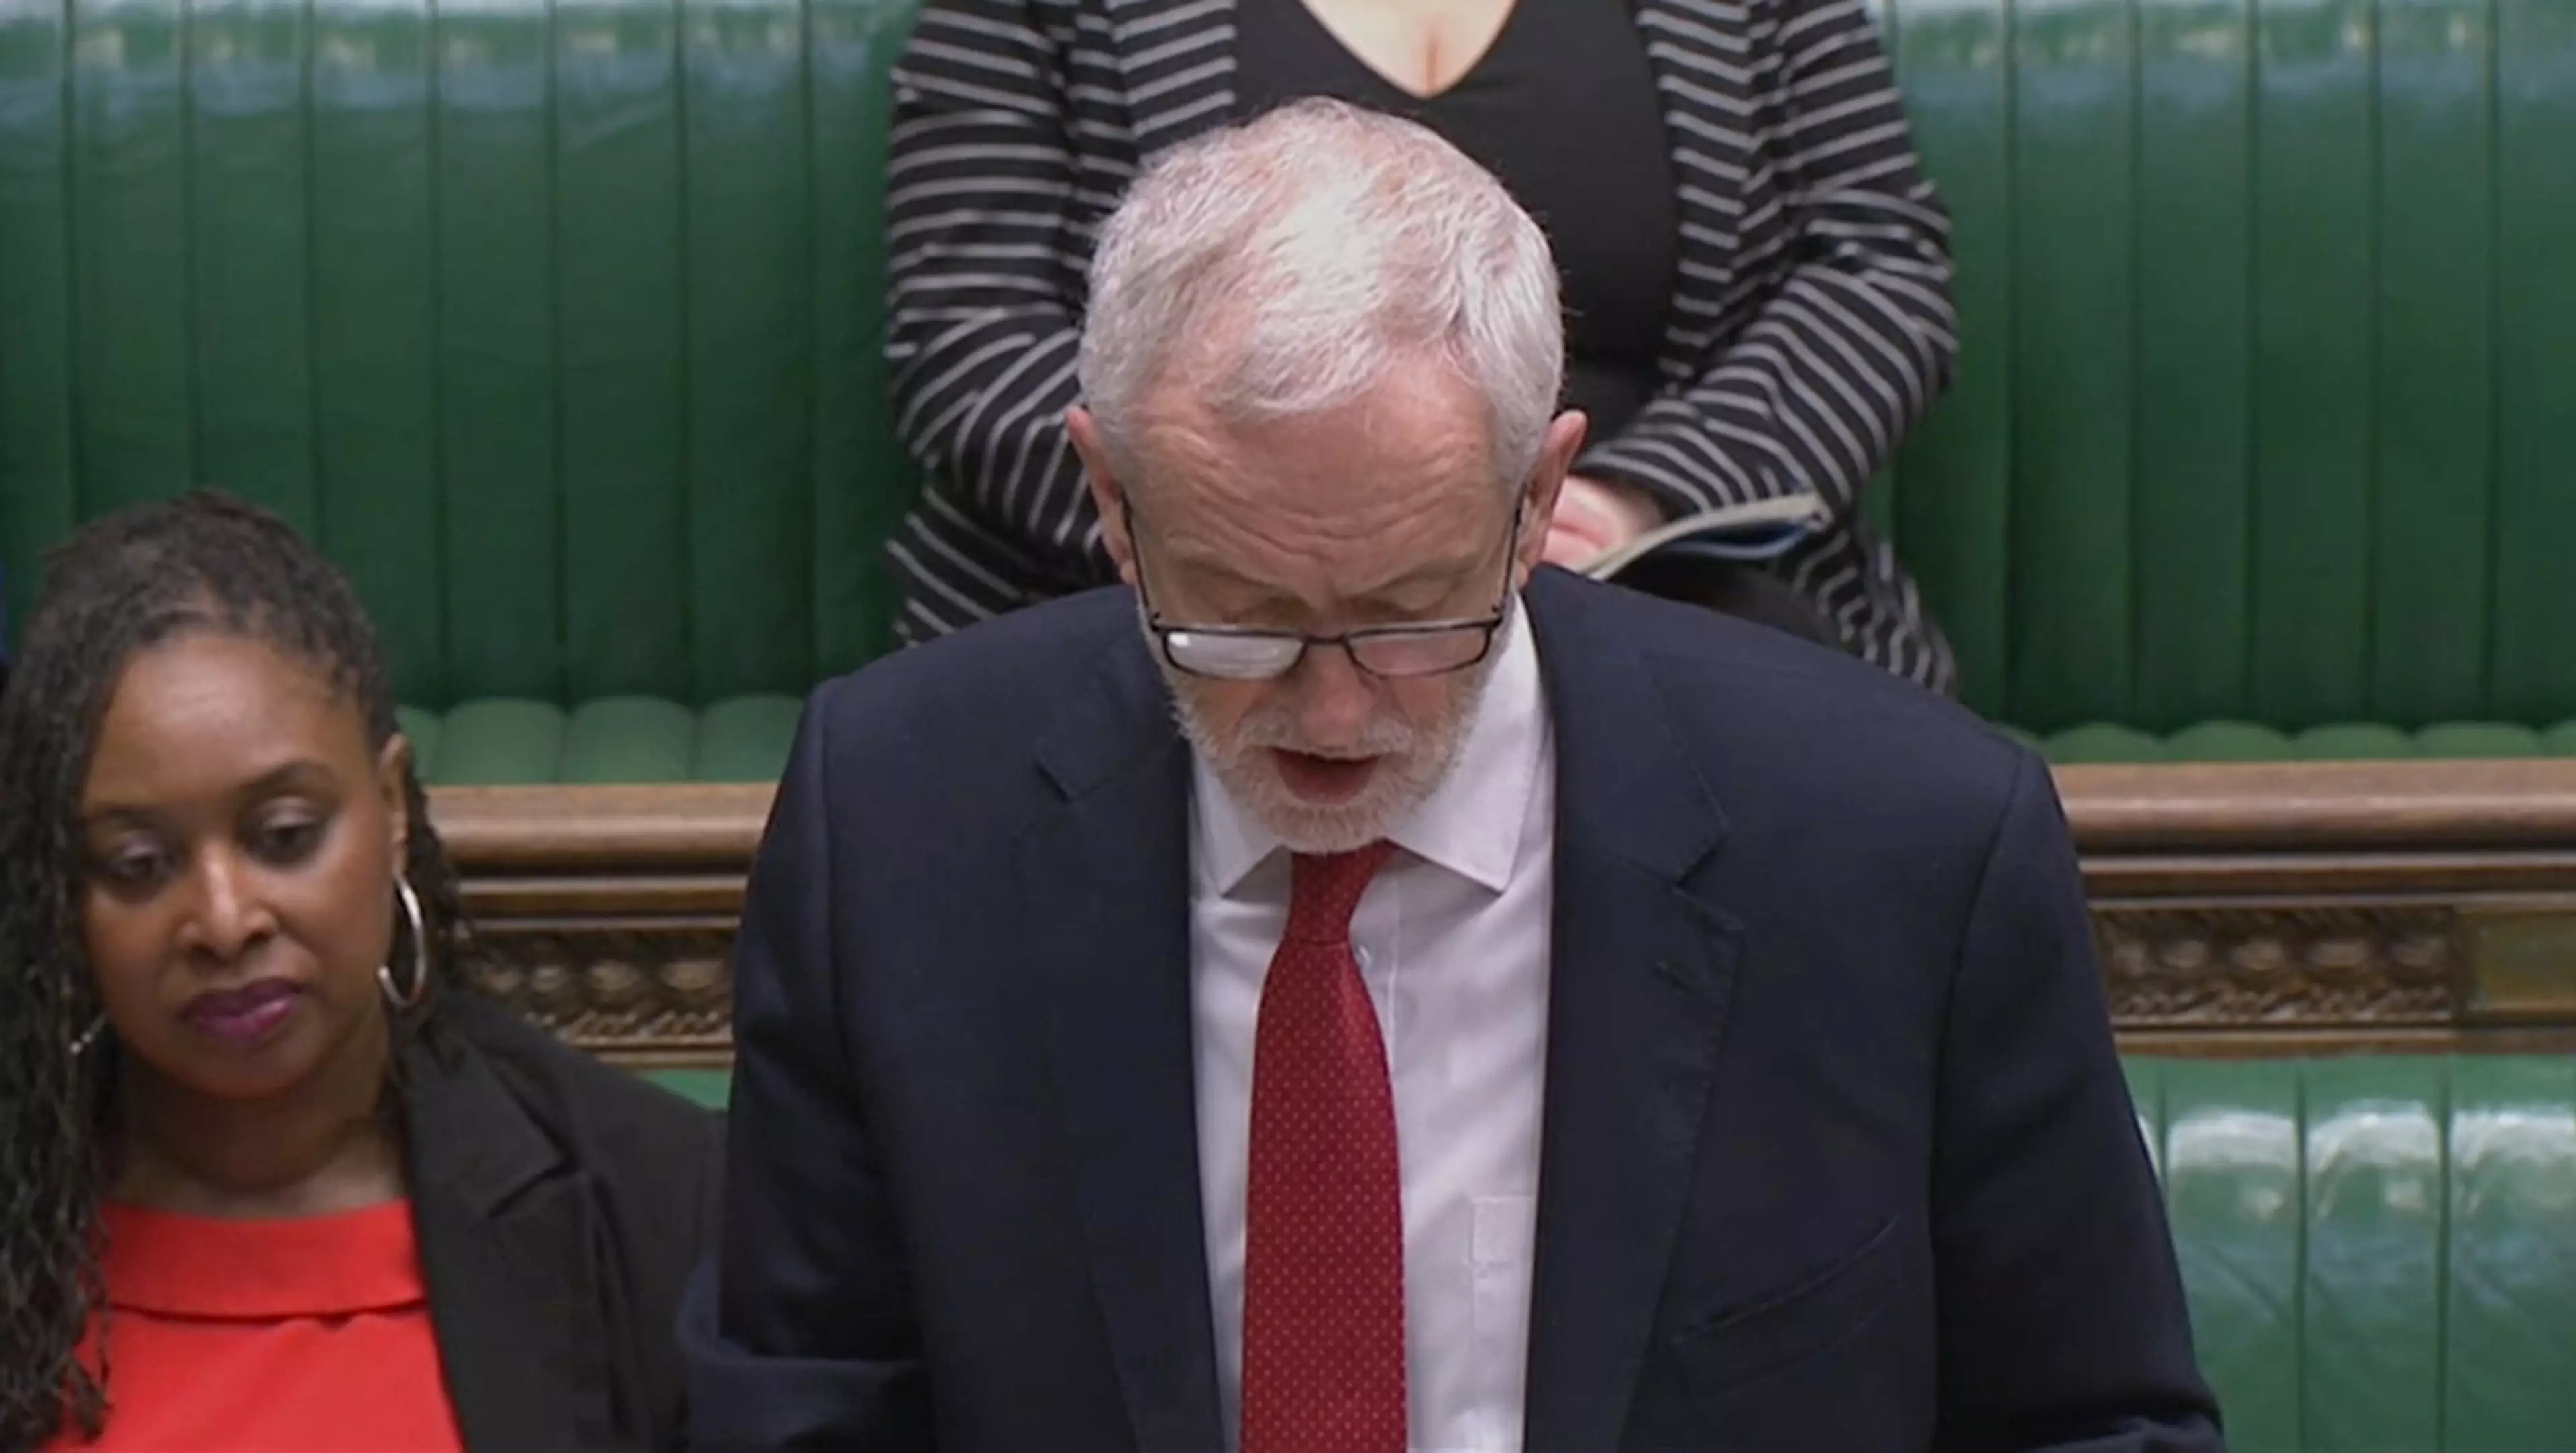 Jeremy Corbyn put the question to the Prime Minister.